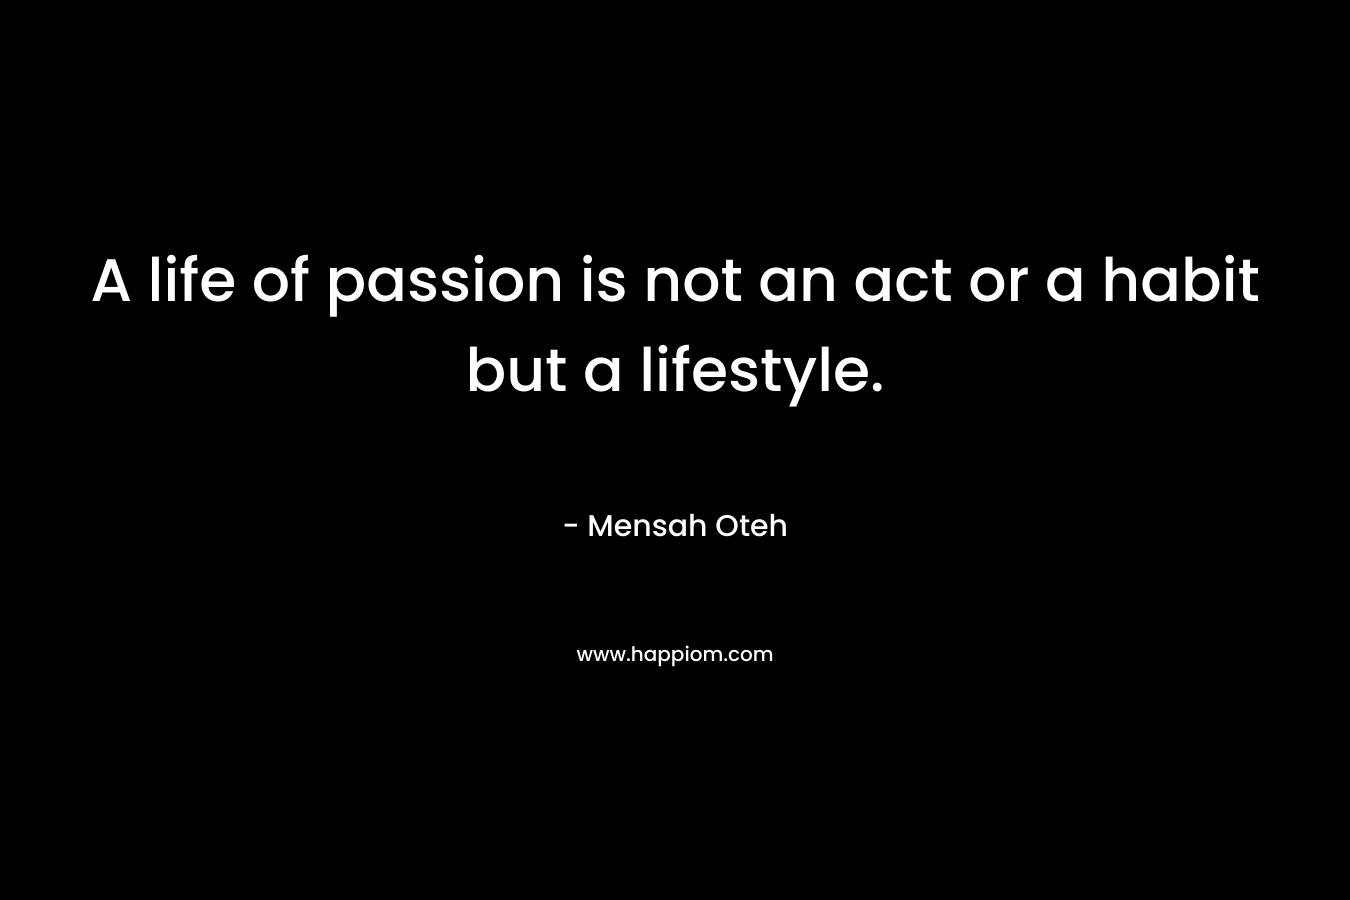 A life of passion is not an act or a habit but a lifestyle.